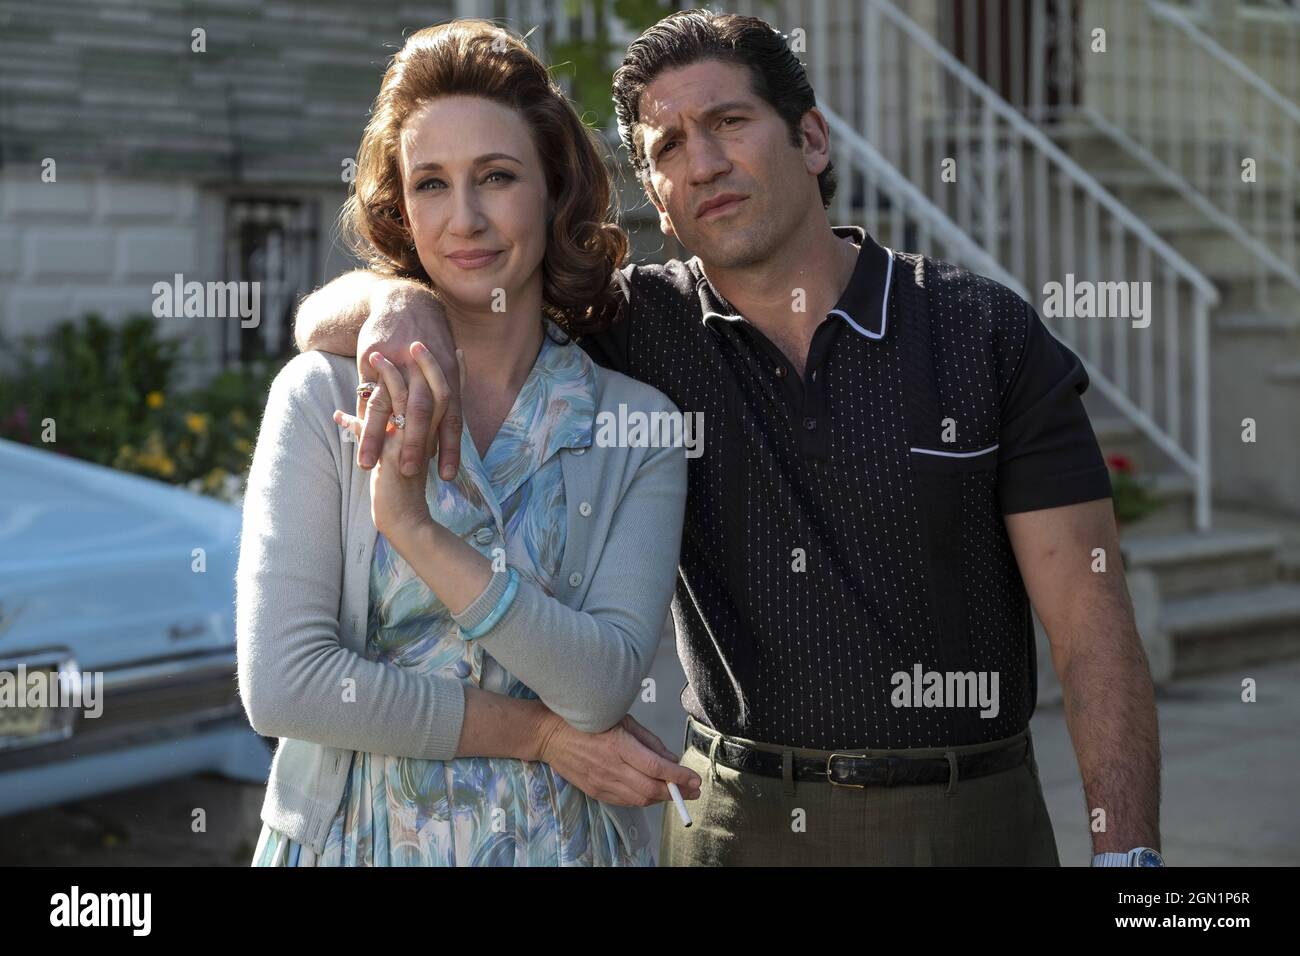 RELEASE DATE: October 1, 2021 TITLE: The Many Saints of Newark STUDIO: HBO DIRECTOR: Alan Taylor PLOT: A look at the formative years of New Jersey gangster, Tony Soprano. STARRING: VERA FARMIGA as Livia Soprano, JON BERNTHAL as Johnny Soprano. (Credit Image: © HBO/Entertainment Pictures) Stock Photo